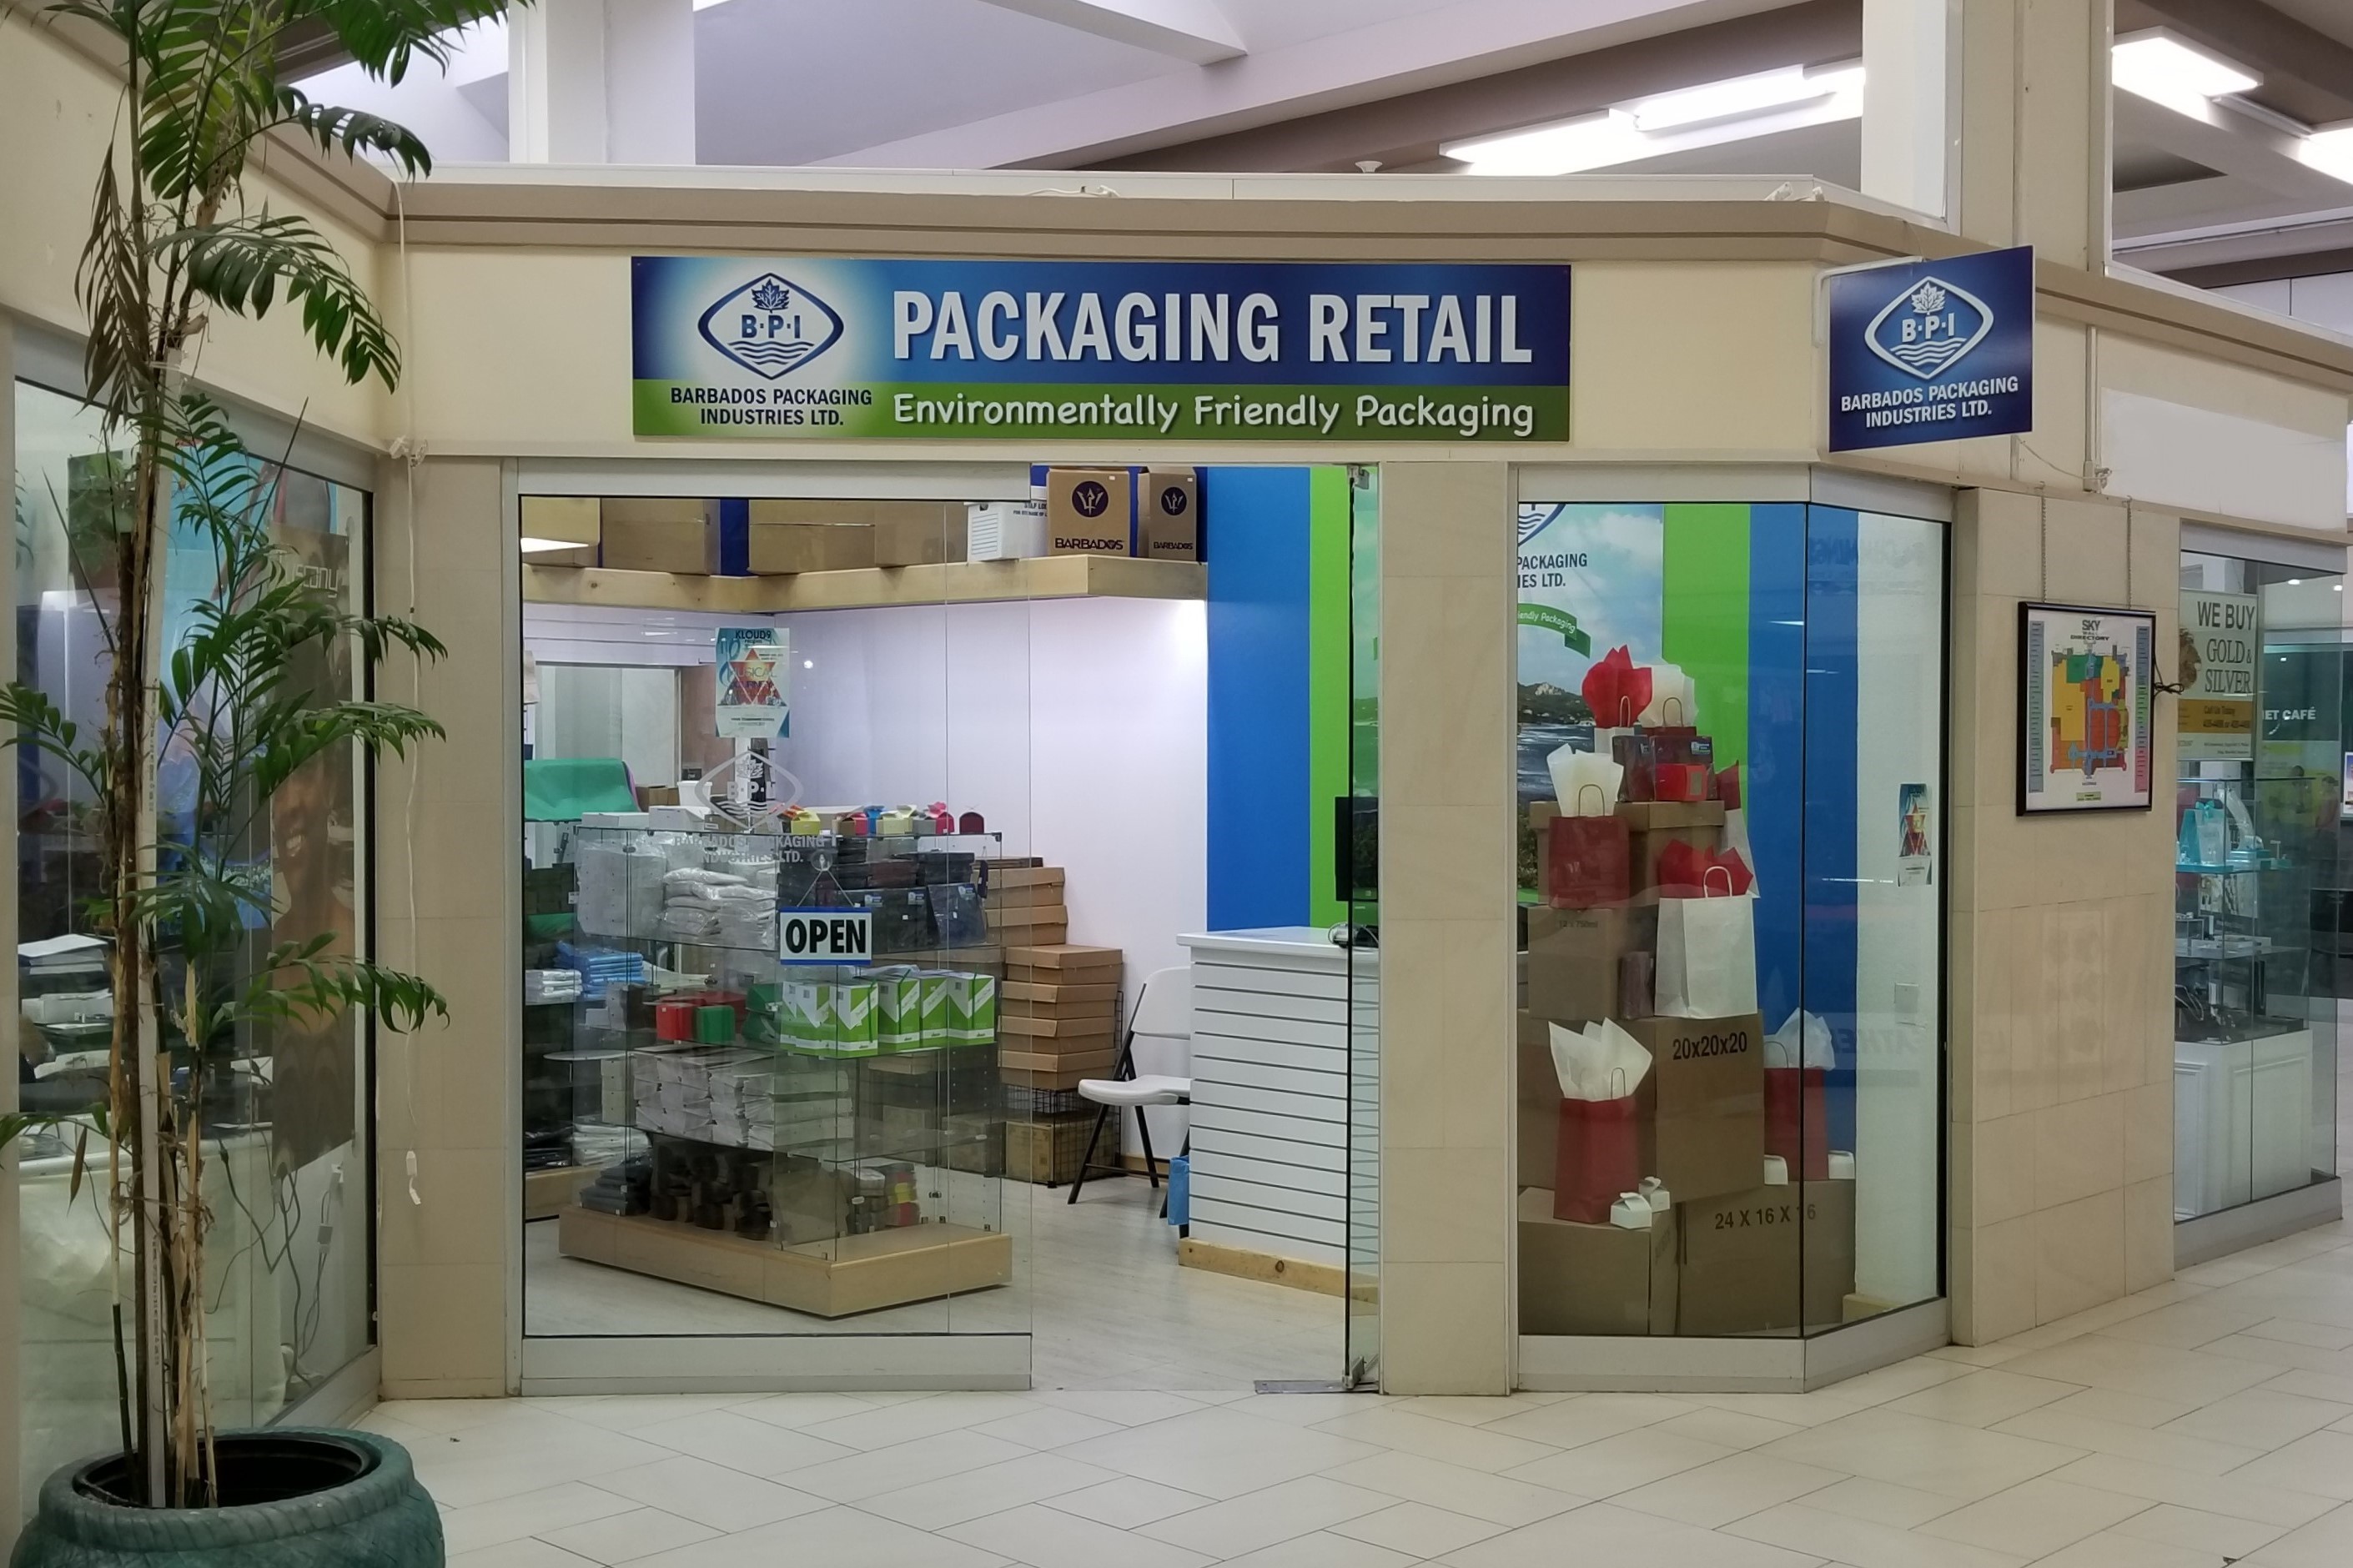 Barbados Packaging Retail Outlet, Sky Mall, Hagget Hall, Barbados